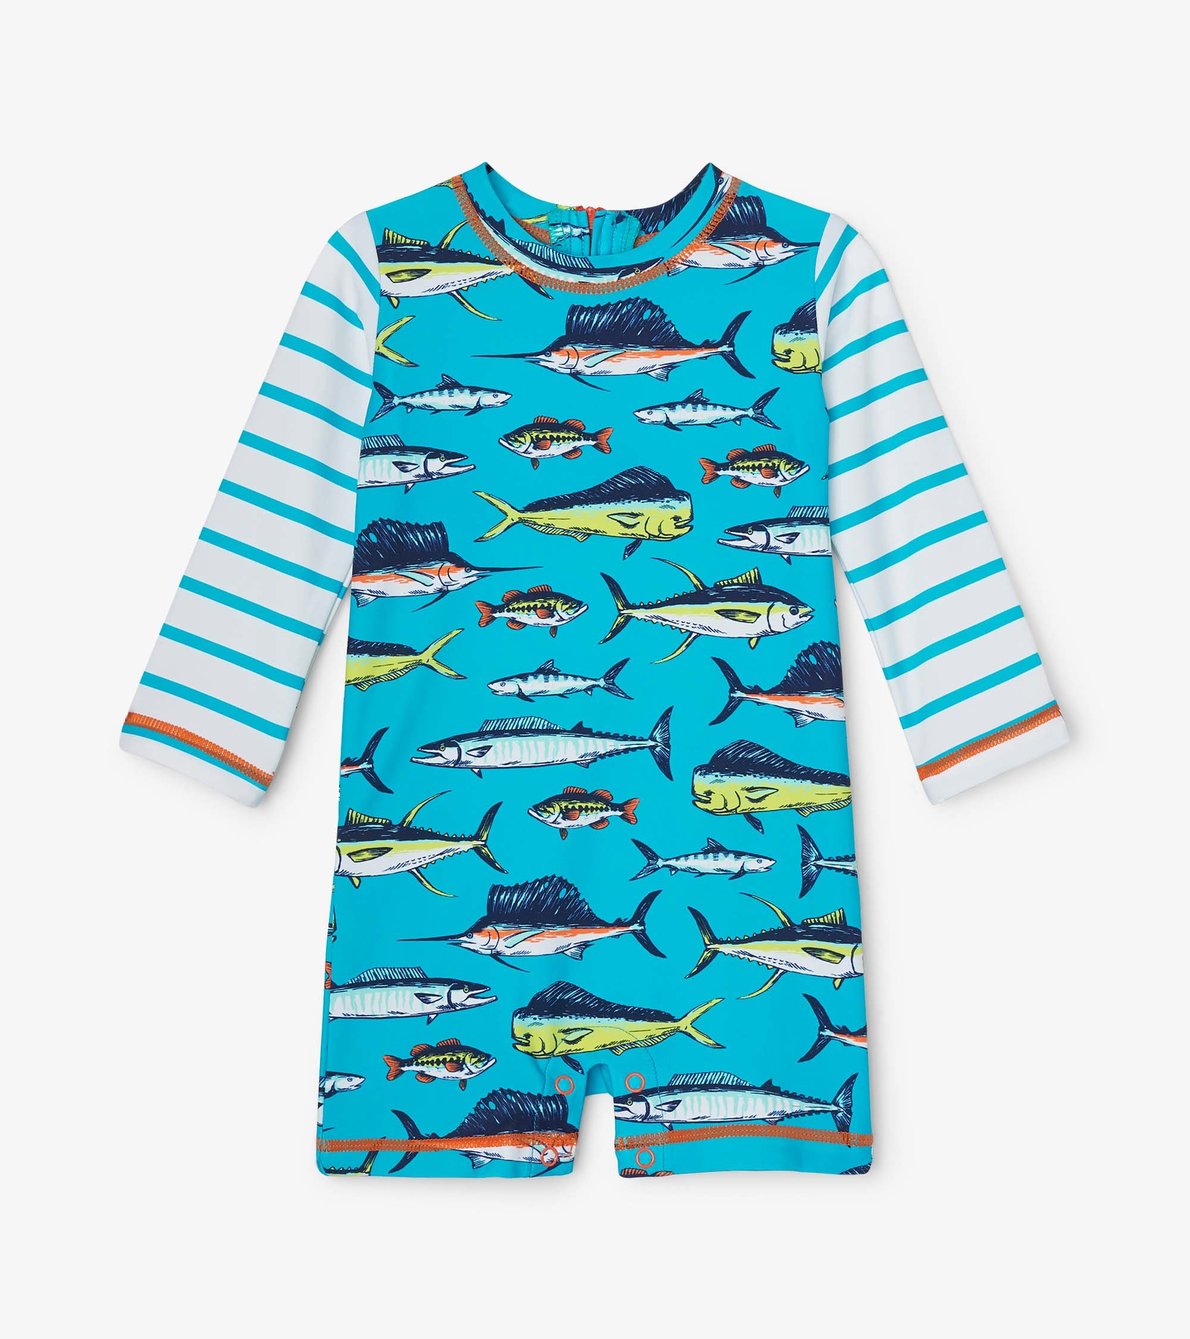 View larger image of Cool Fish Baby One-Piece Rashguard